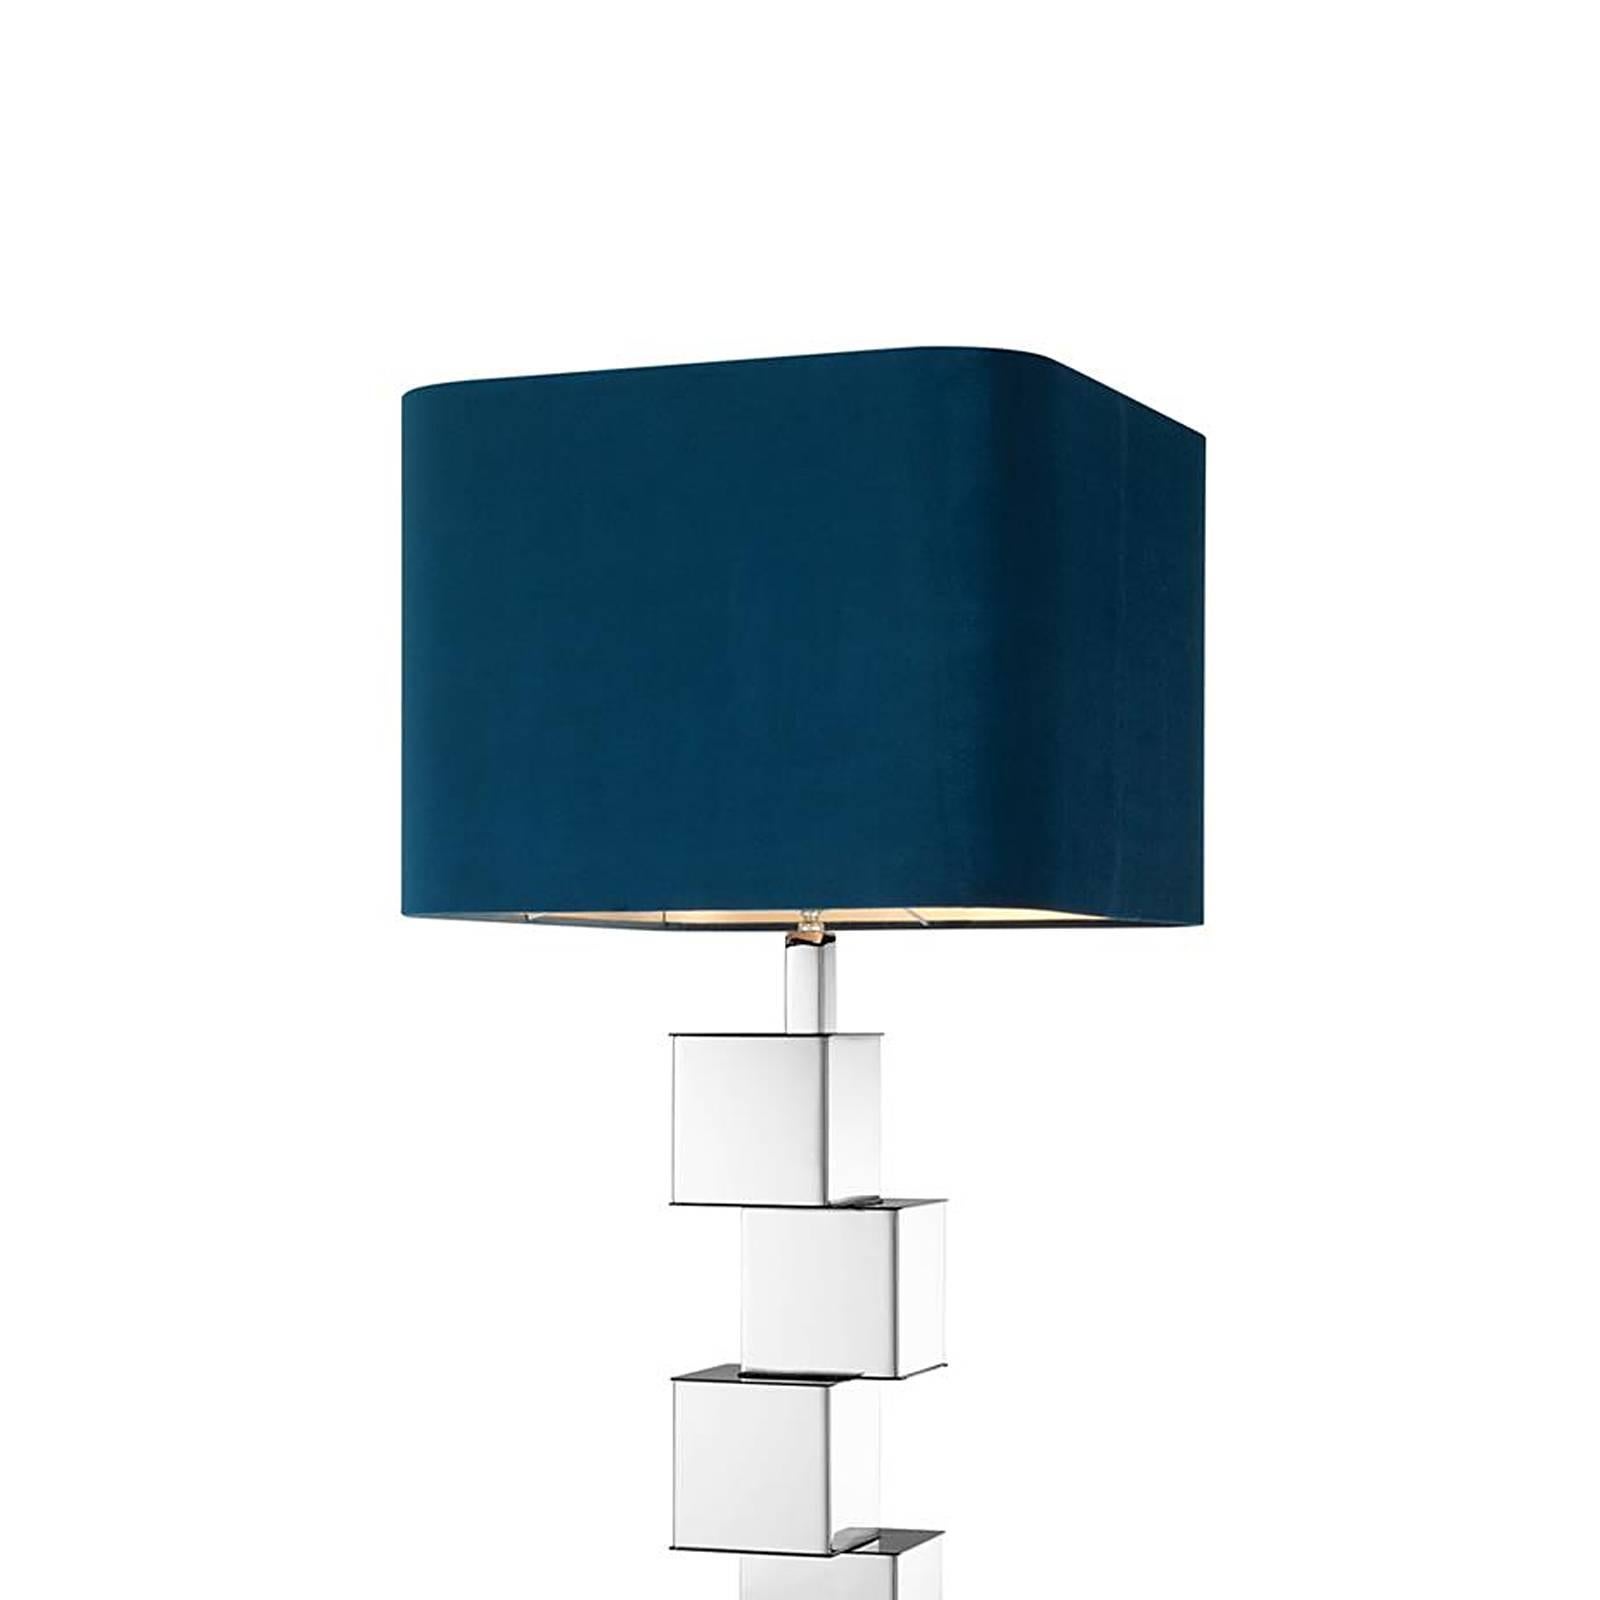 Table lamp marina in polished nickel 
finish with blue velvet lampshade.
Base: 15x15 cm. 1 bulb lamp holder 
type E27, max 40 watt. Bulbs not included.
